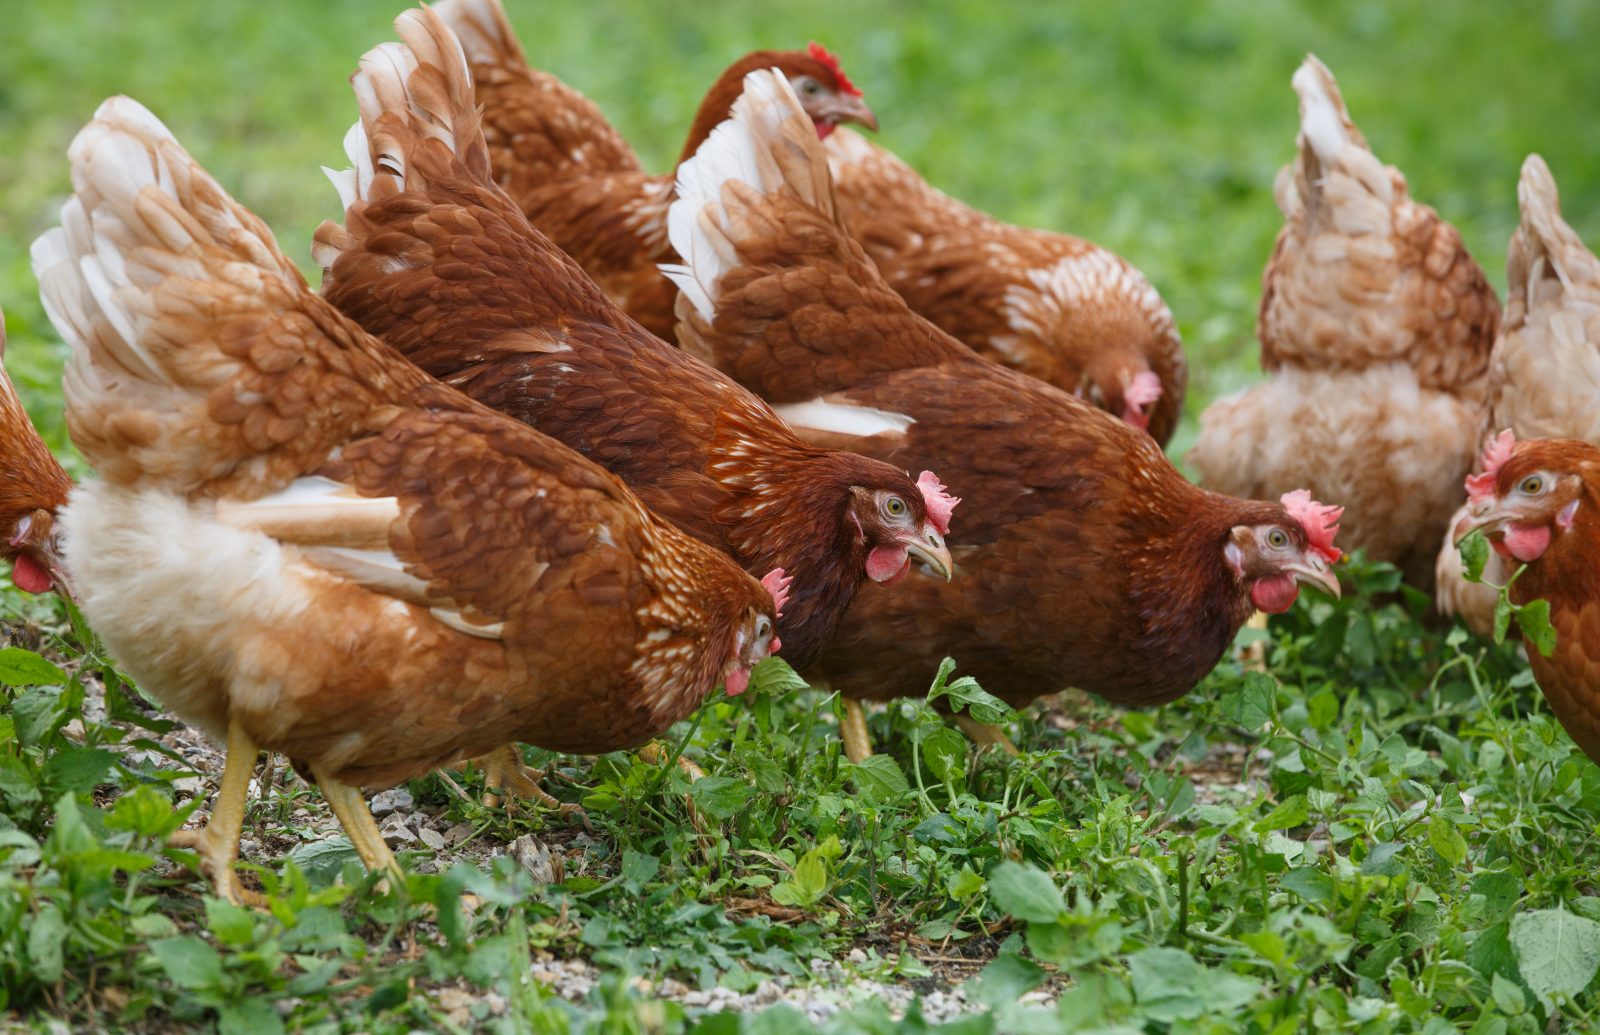 GCAW Consultation on Cage-Free Egg Procurement – Extended deadline